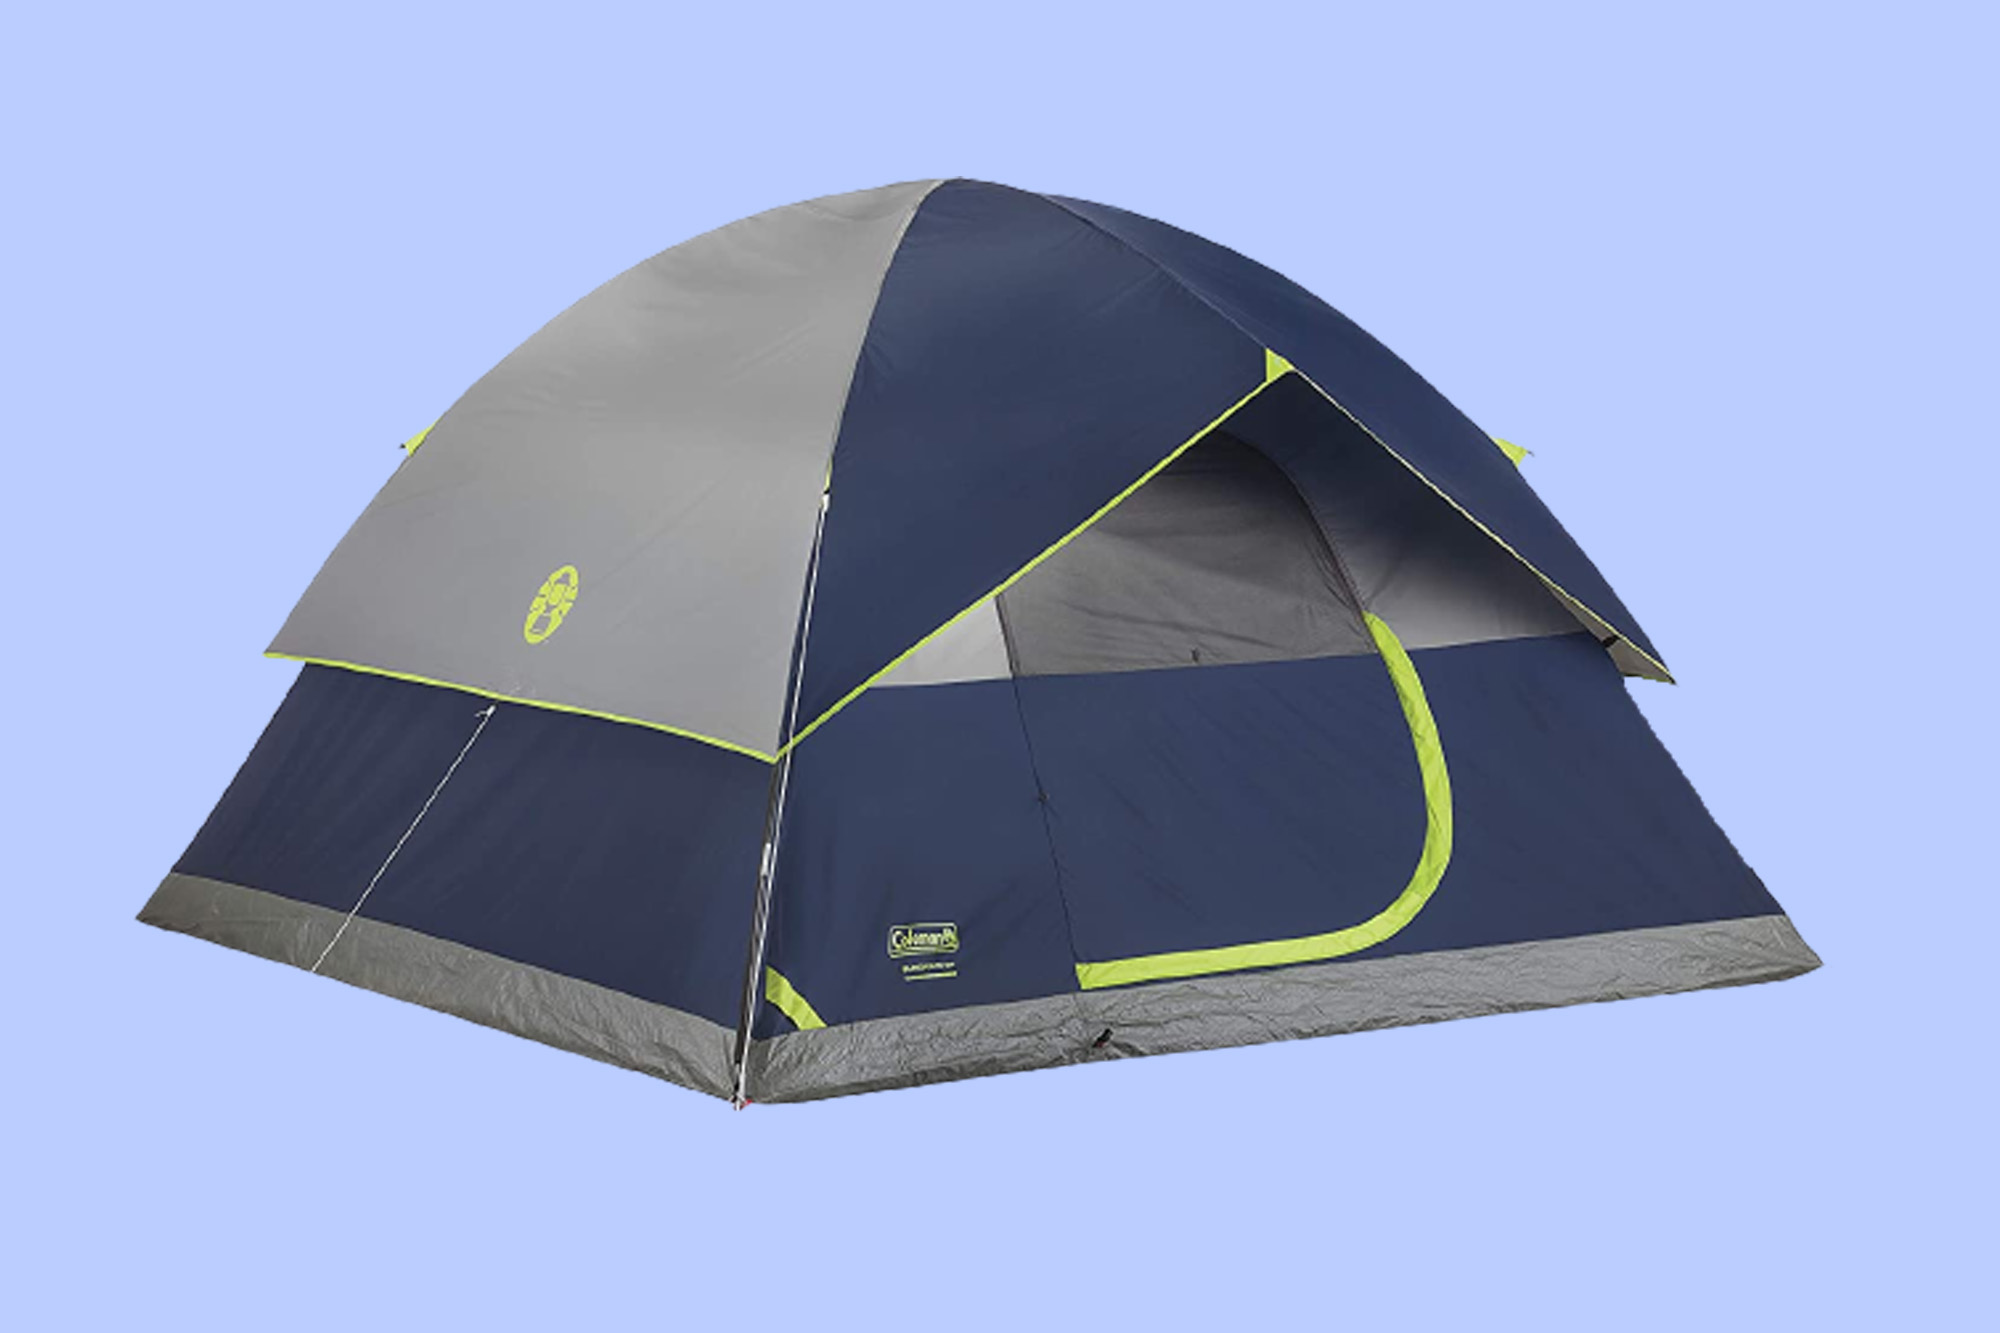 Get ready for outdoor adventures with camping deals on Amazon